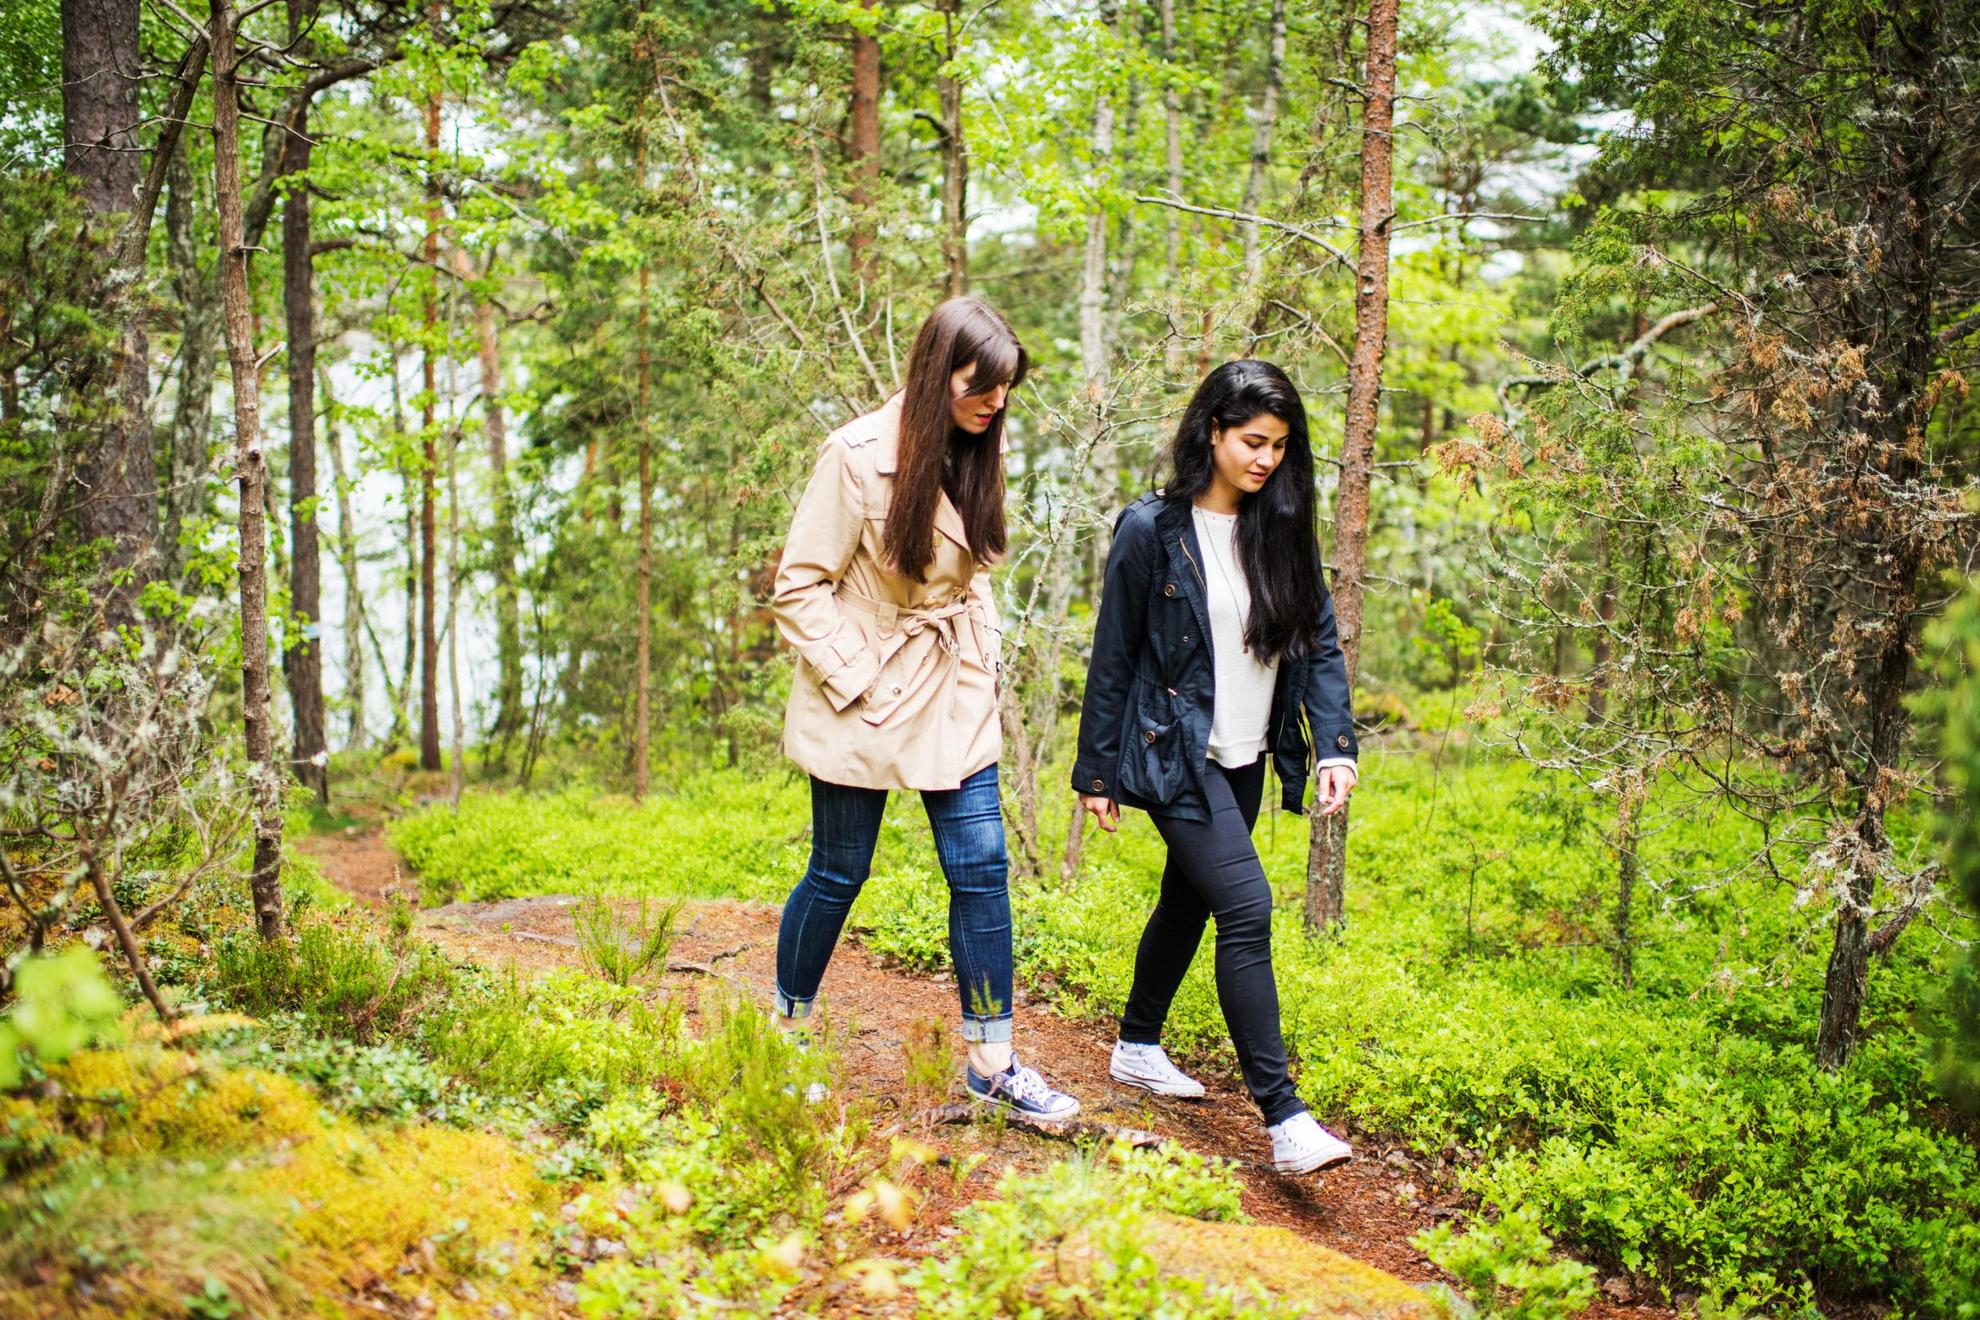 Two women in Sweden are walking on a path through a lush forest.